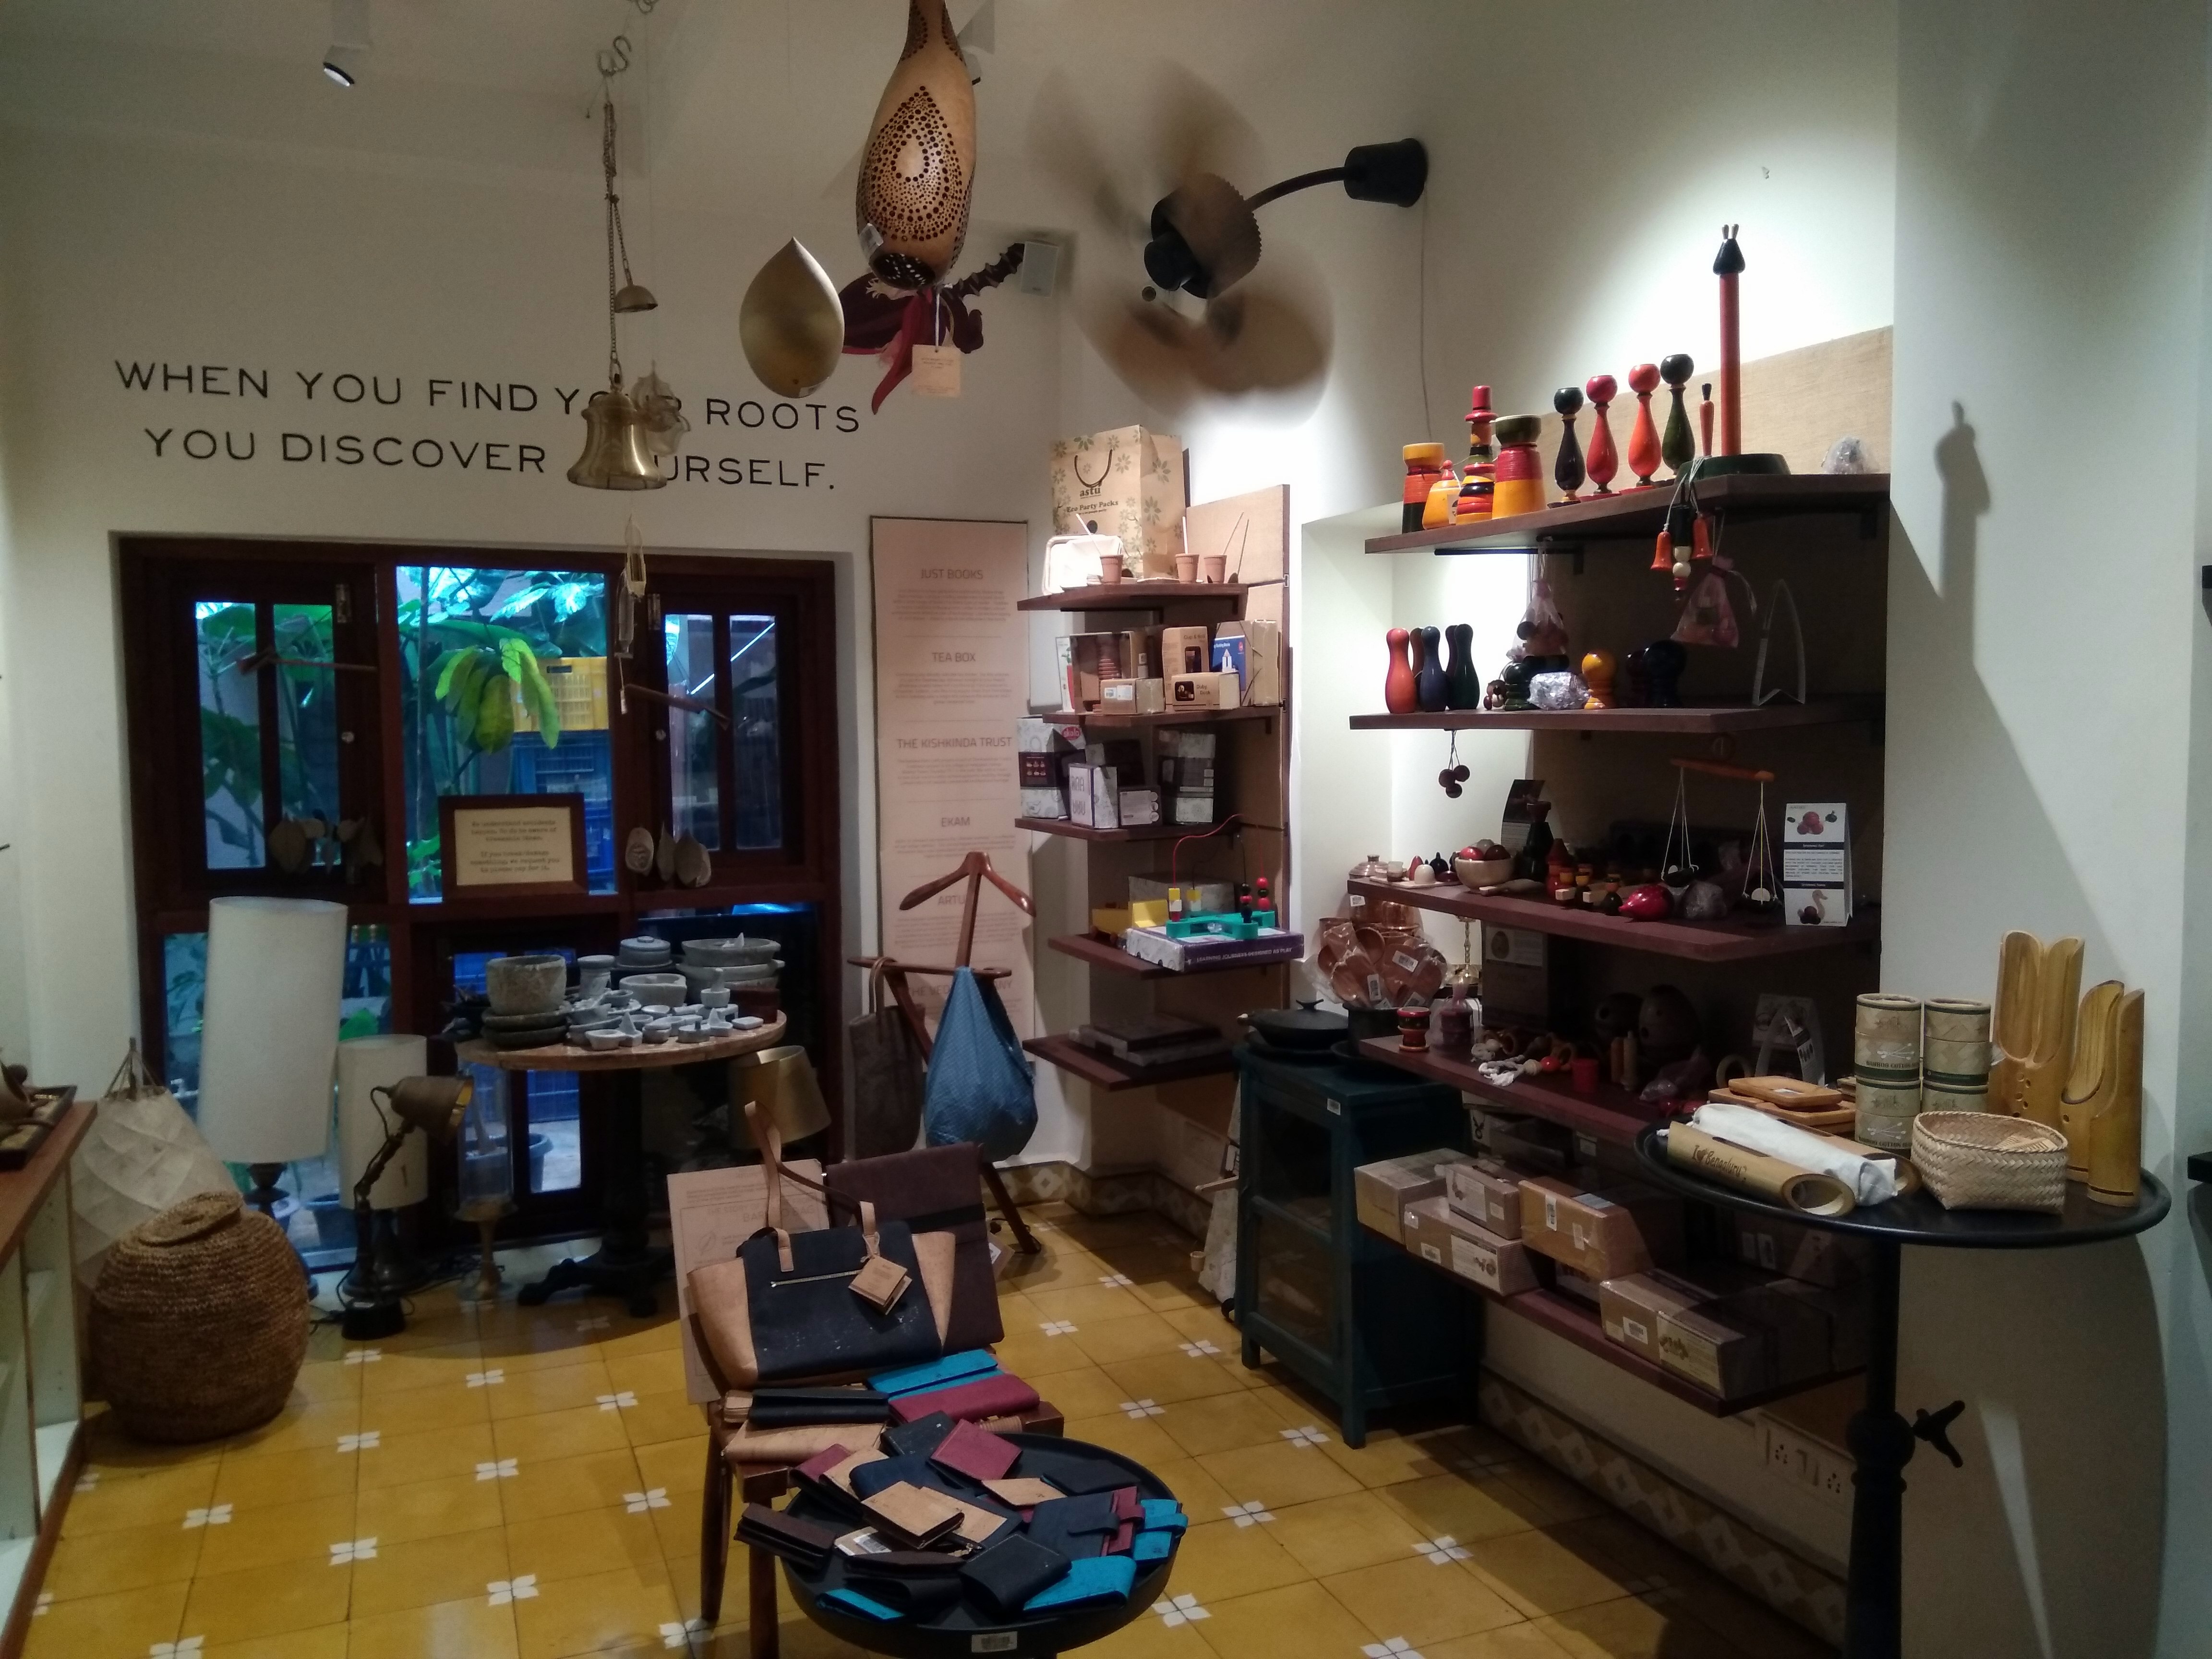 The eclectic interiors of the store